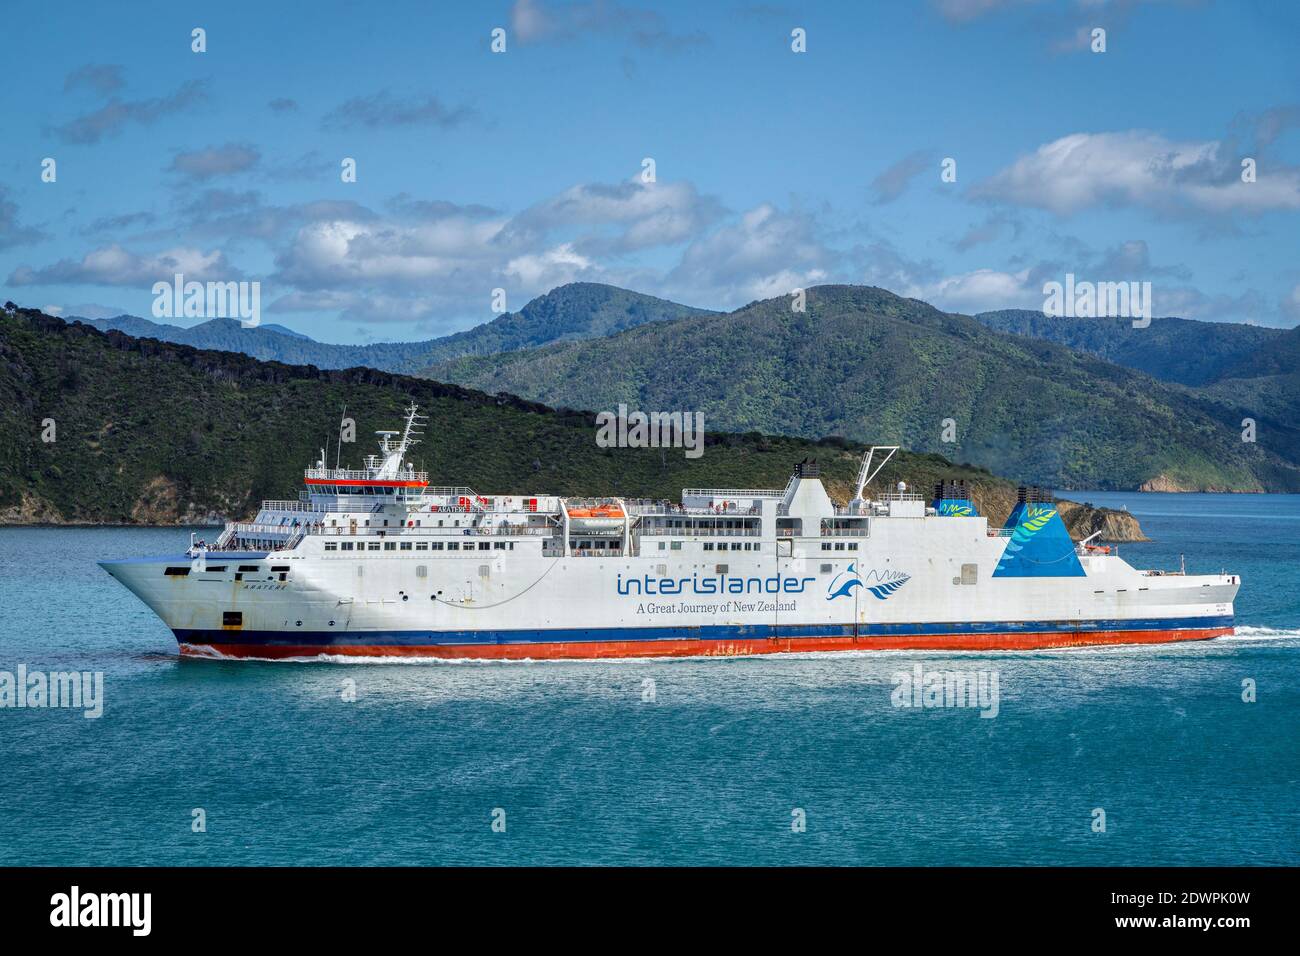 The Aratere interislander ferry in the Cook Strait within the Marlborough Sounds of South Island, New Zealand. Stock Photo